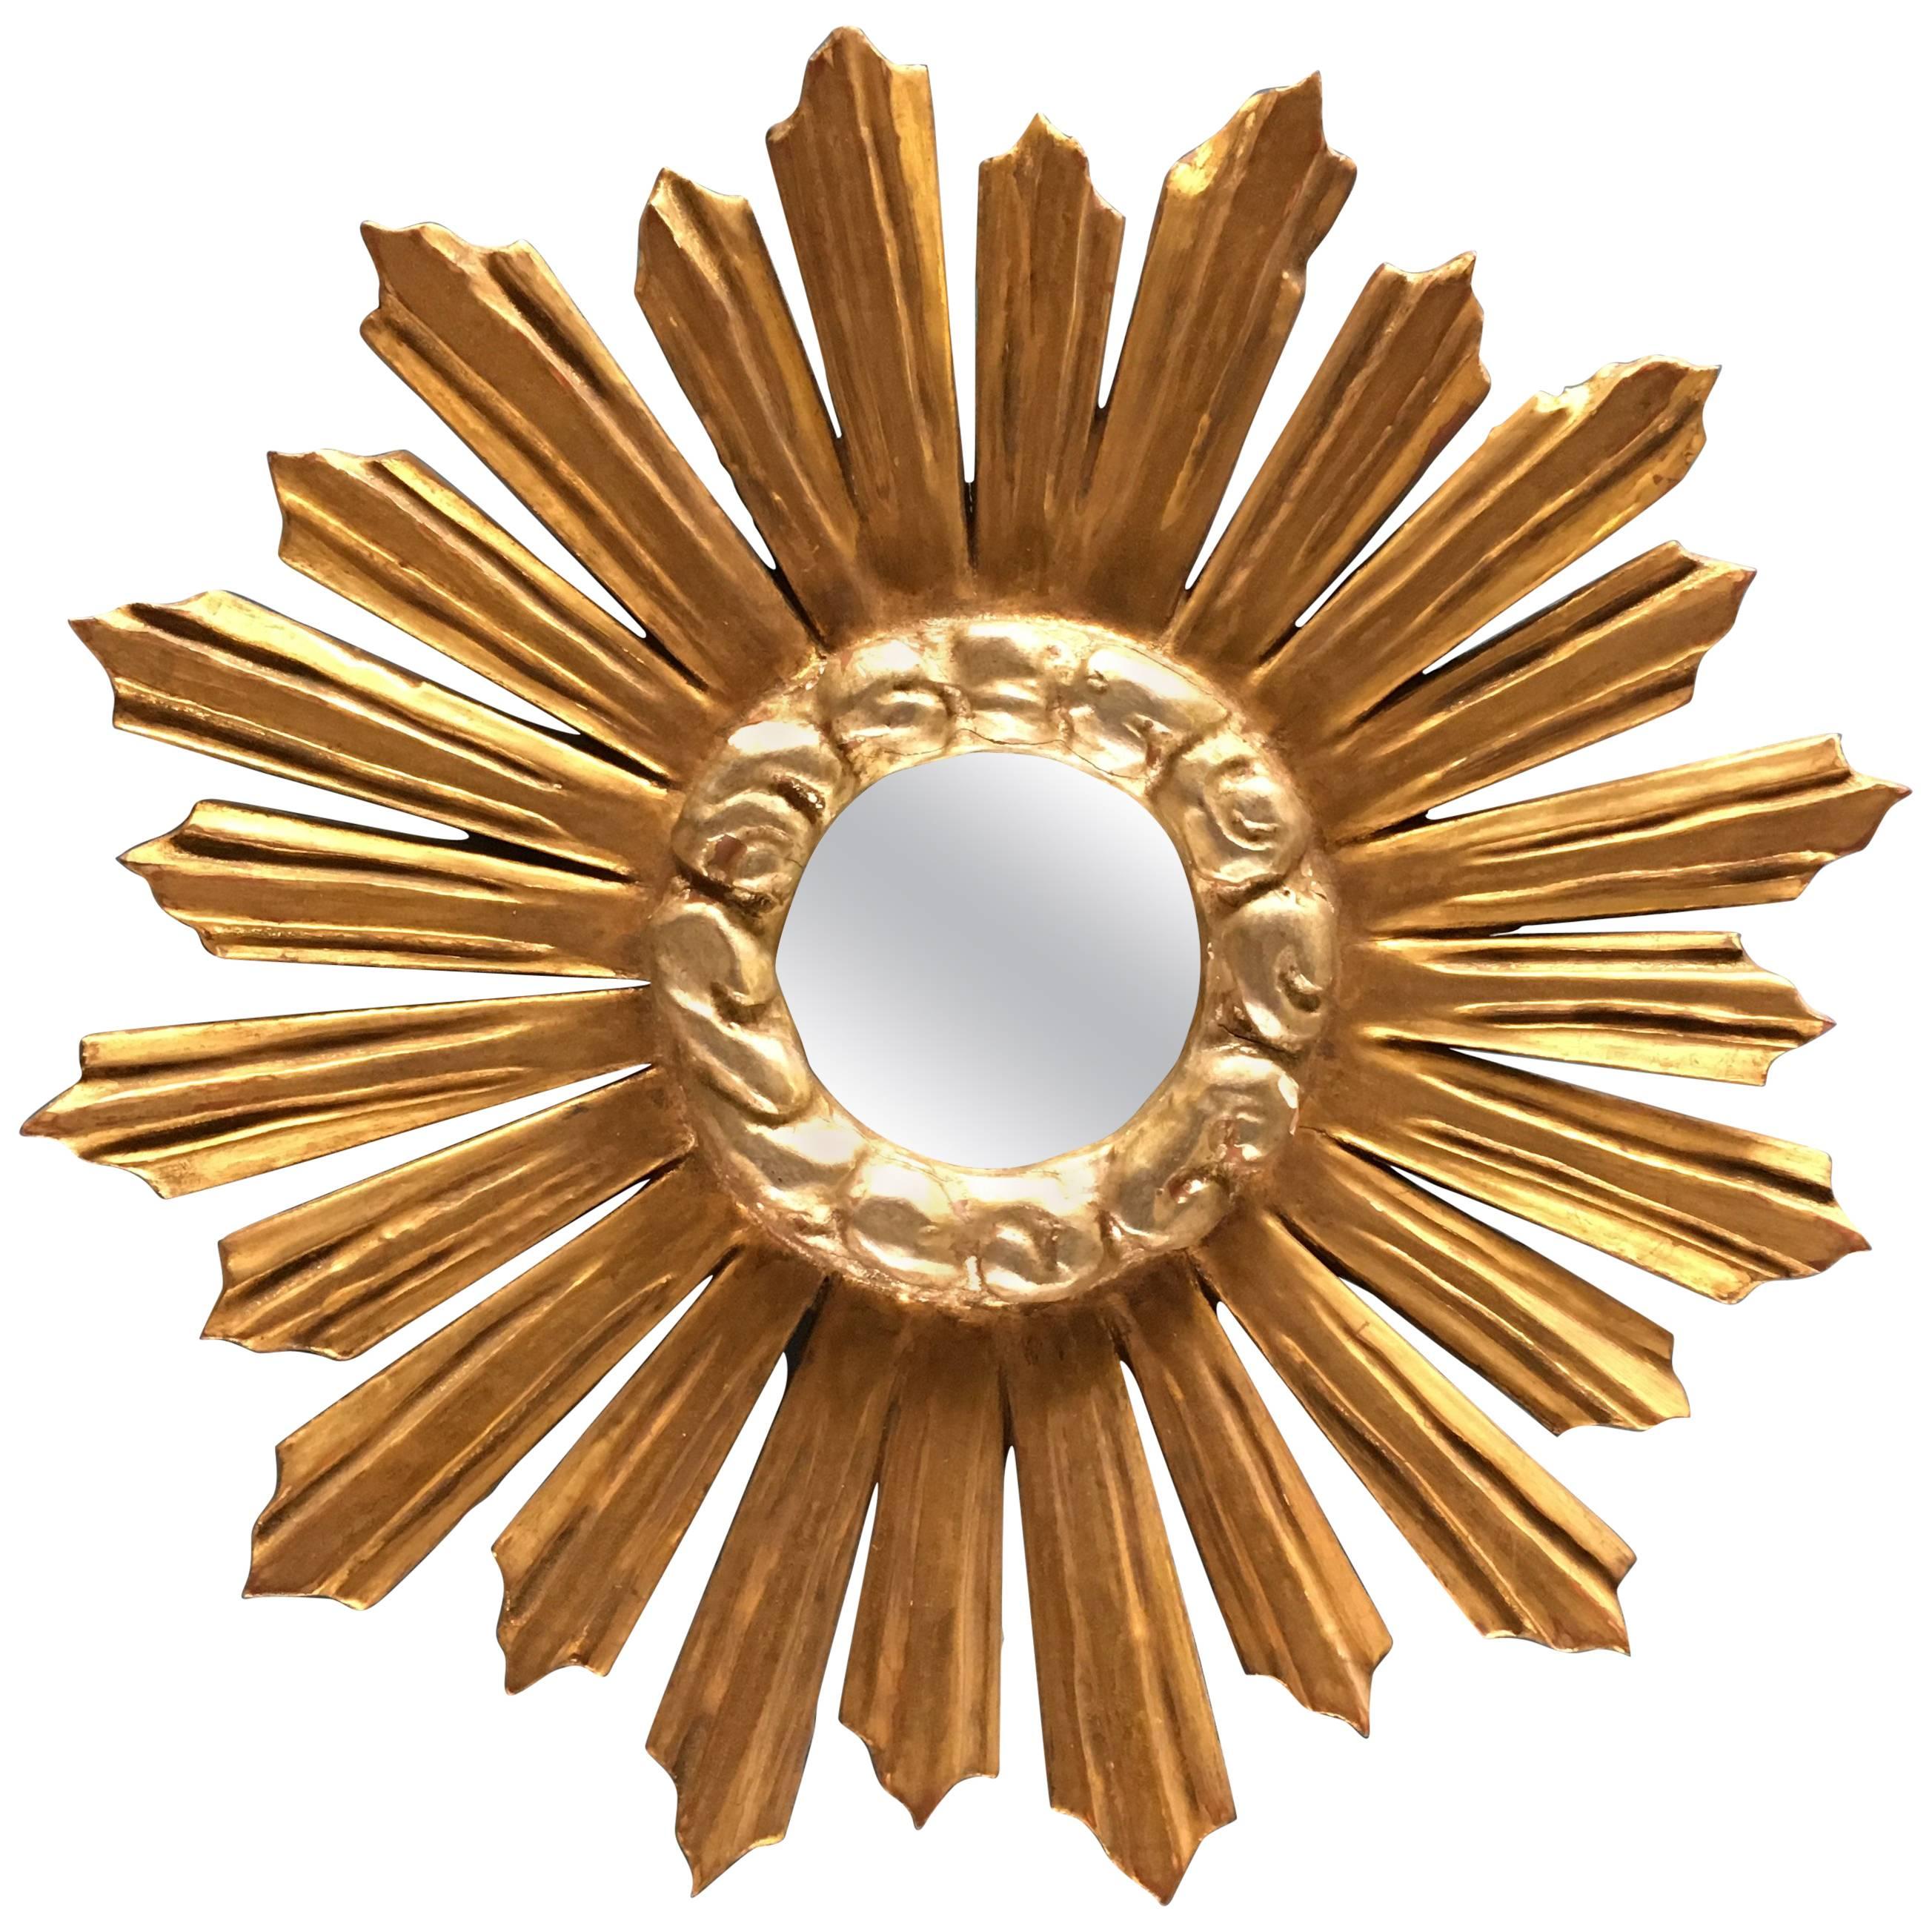 19th Century French Round Giltwood Mirror "Soleil" For Sale